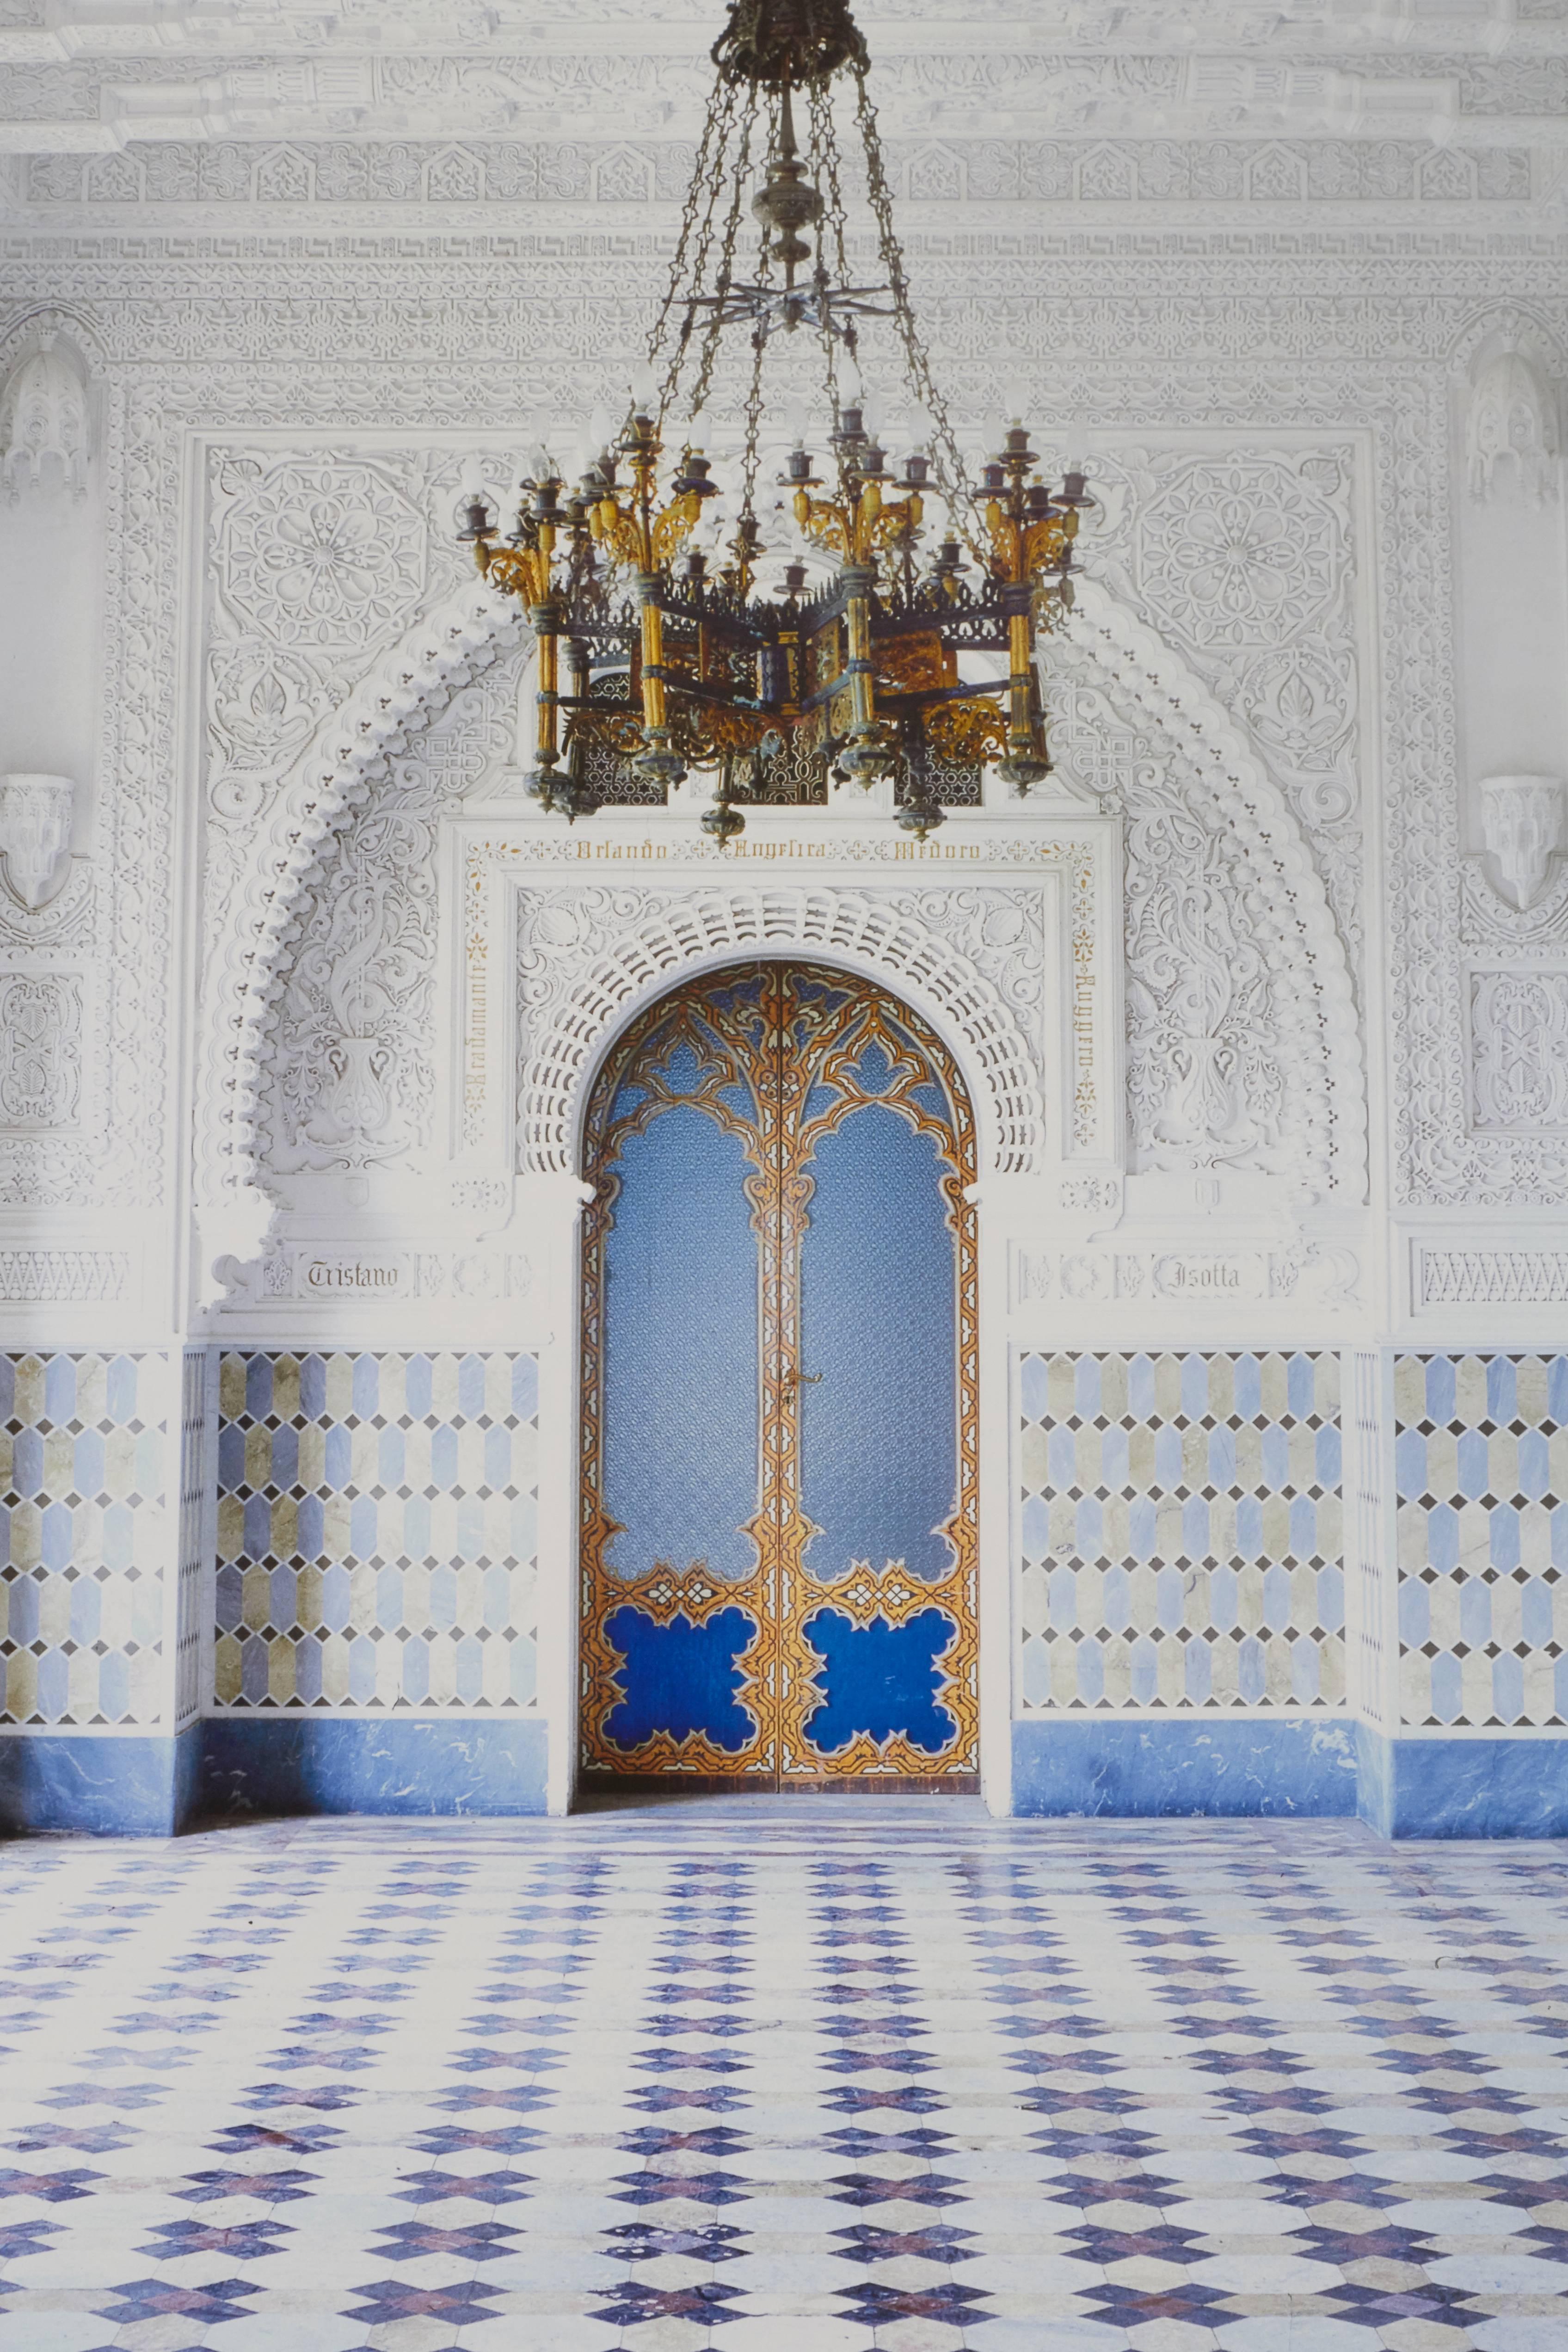 Massimo Listri (Italian, b. 1953)
Castello di Sammezzano IV-Reggello
2005
archival lambda color photograph
39 3/8 x 47 1/4  inches
framed: 49 3/4 x 57 1/2 inches
Edition 1 of 5
signed, titled, dated and numbered on artist's label on the verso